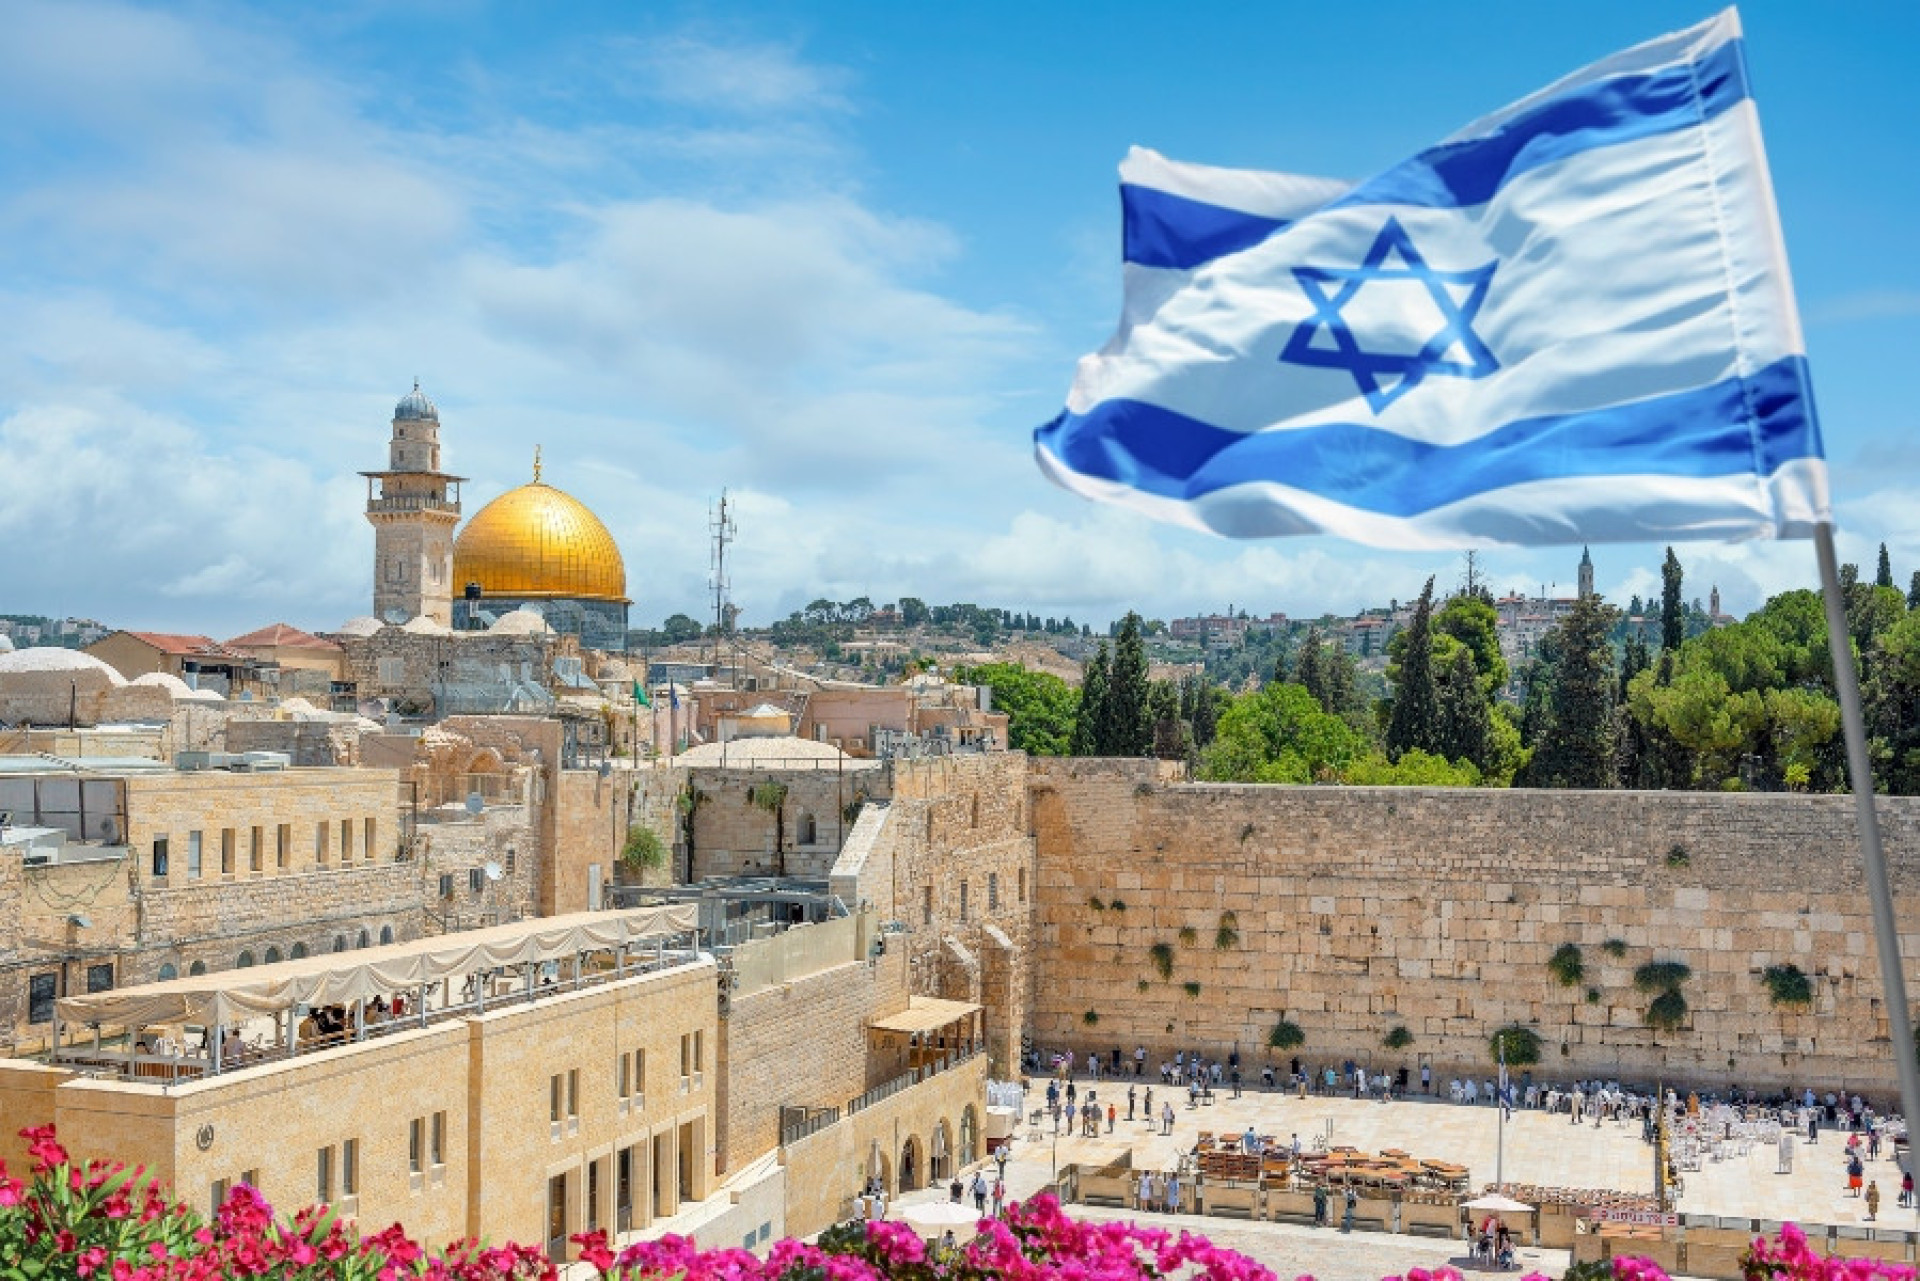 <p>Israel's advanced healthcare system and robust public health measures support the longevity of its citizens. Cultural emphasis on family and community might also play a role in the Israelis' extended lifespans.</p><p>You may also like:<a href="https://www.starsinsider.com/n/444420?utm_source=msn.com&utm_medium=display&utm_campaign=referral_description&utm_content=582401en-en"> Famous women who were demonized by the media</a></p>